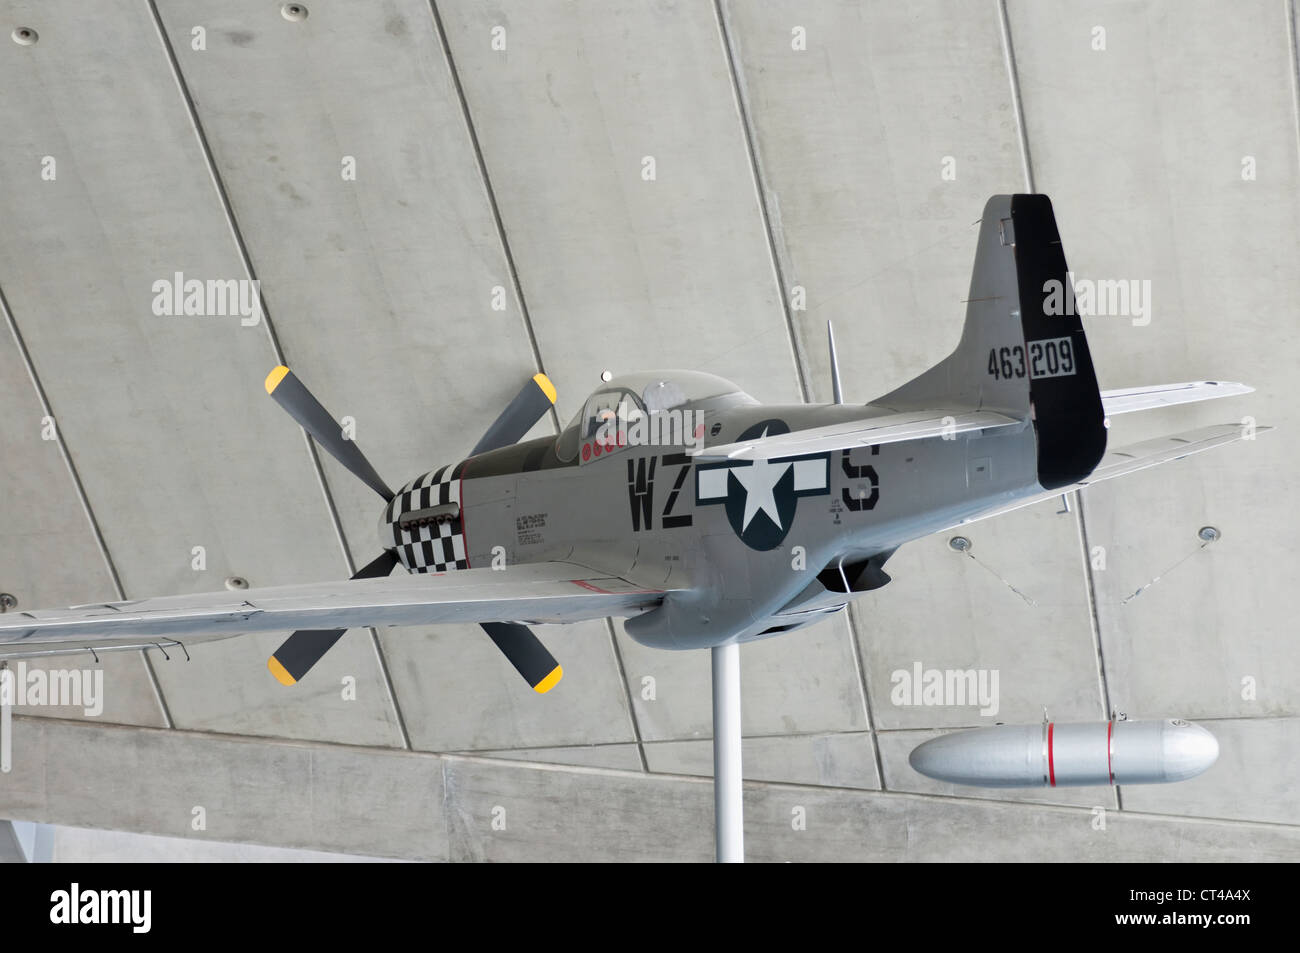 https://c8.alamy.com/comp/CT4A4X/p-51-mustang-fighter-plane-on-display-hanging-from-the-ceiling-of-CT4A4X.jpg